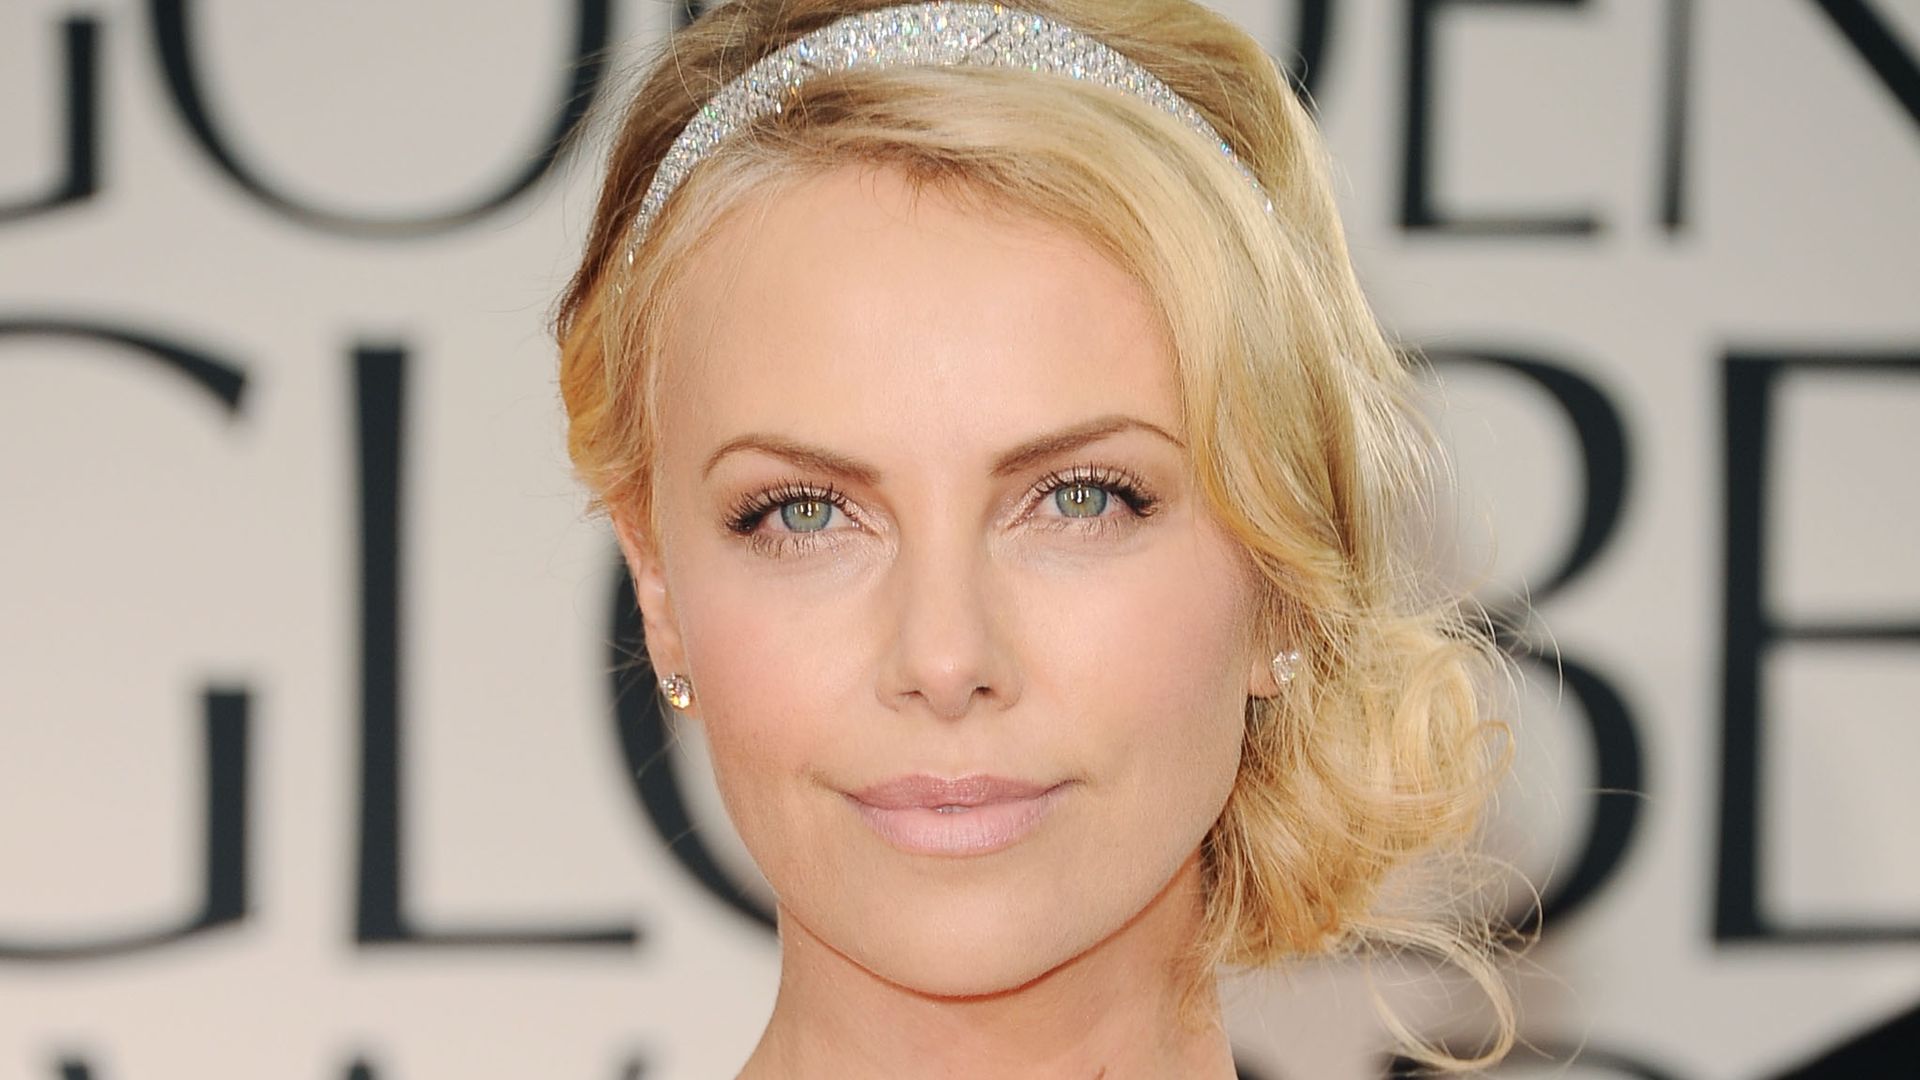 Charlize Theron arrives at the 69th Annual Golden Globe Awards in 2012